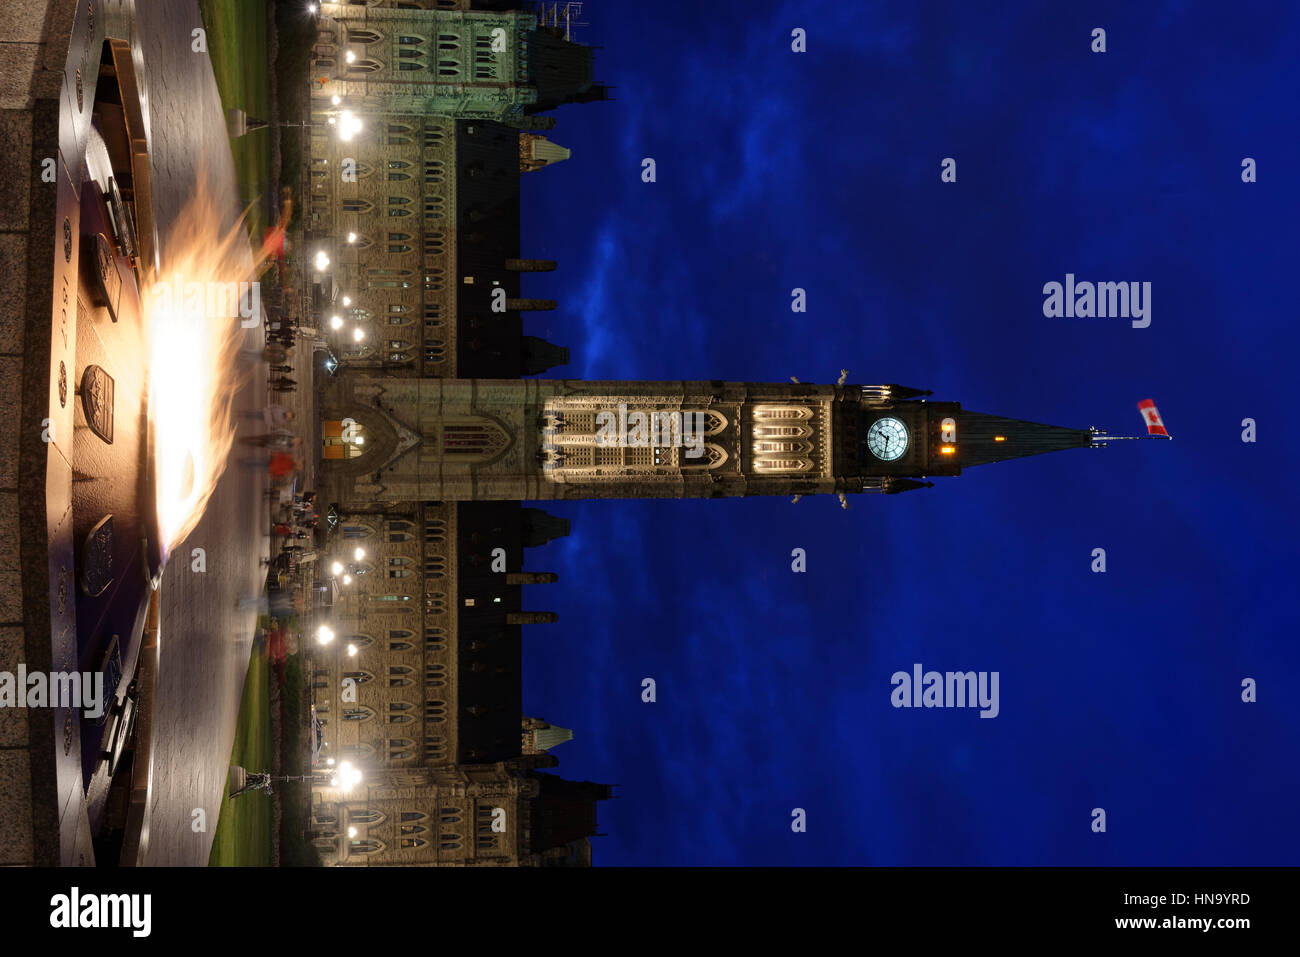 Parliament with symbolic flame, Centennial Flame, Parliament Hill, night scene, Ottawa, Ontario Province, Canada Stock Photo